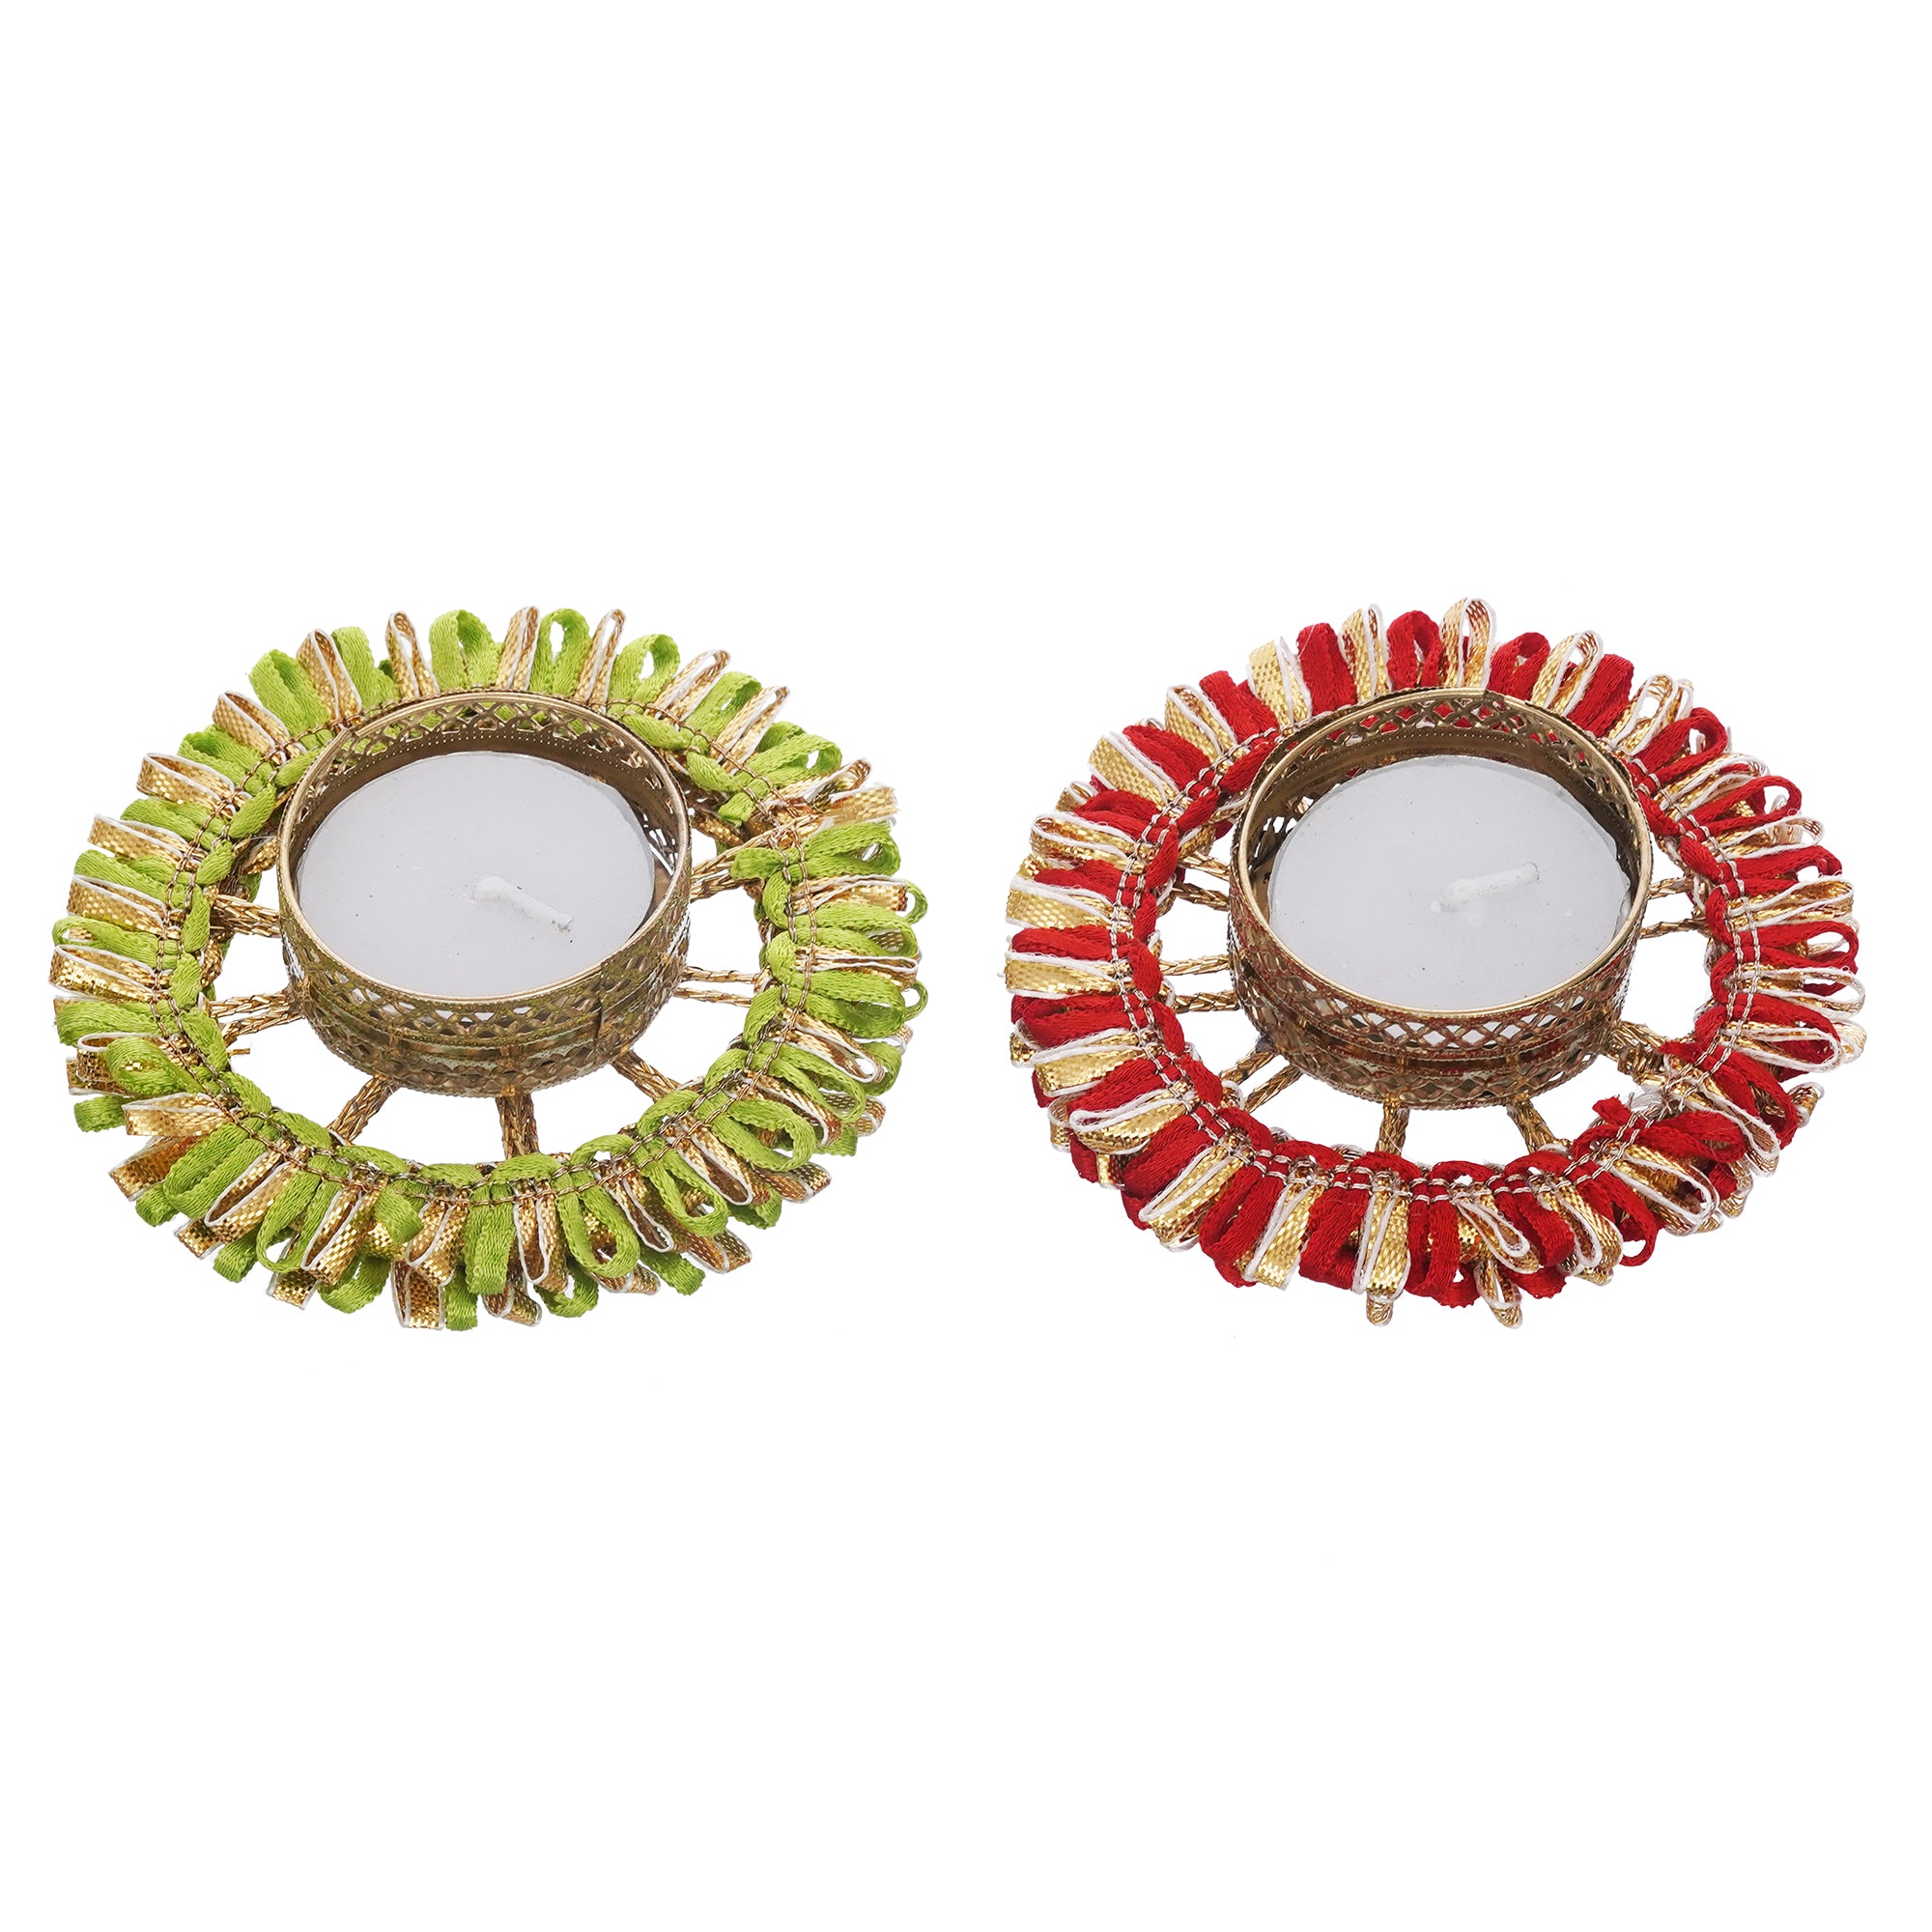 eCraftIndia Set of 2 Red and Green Round Shaped Floral Decorative Tea Light Candle Holders 2